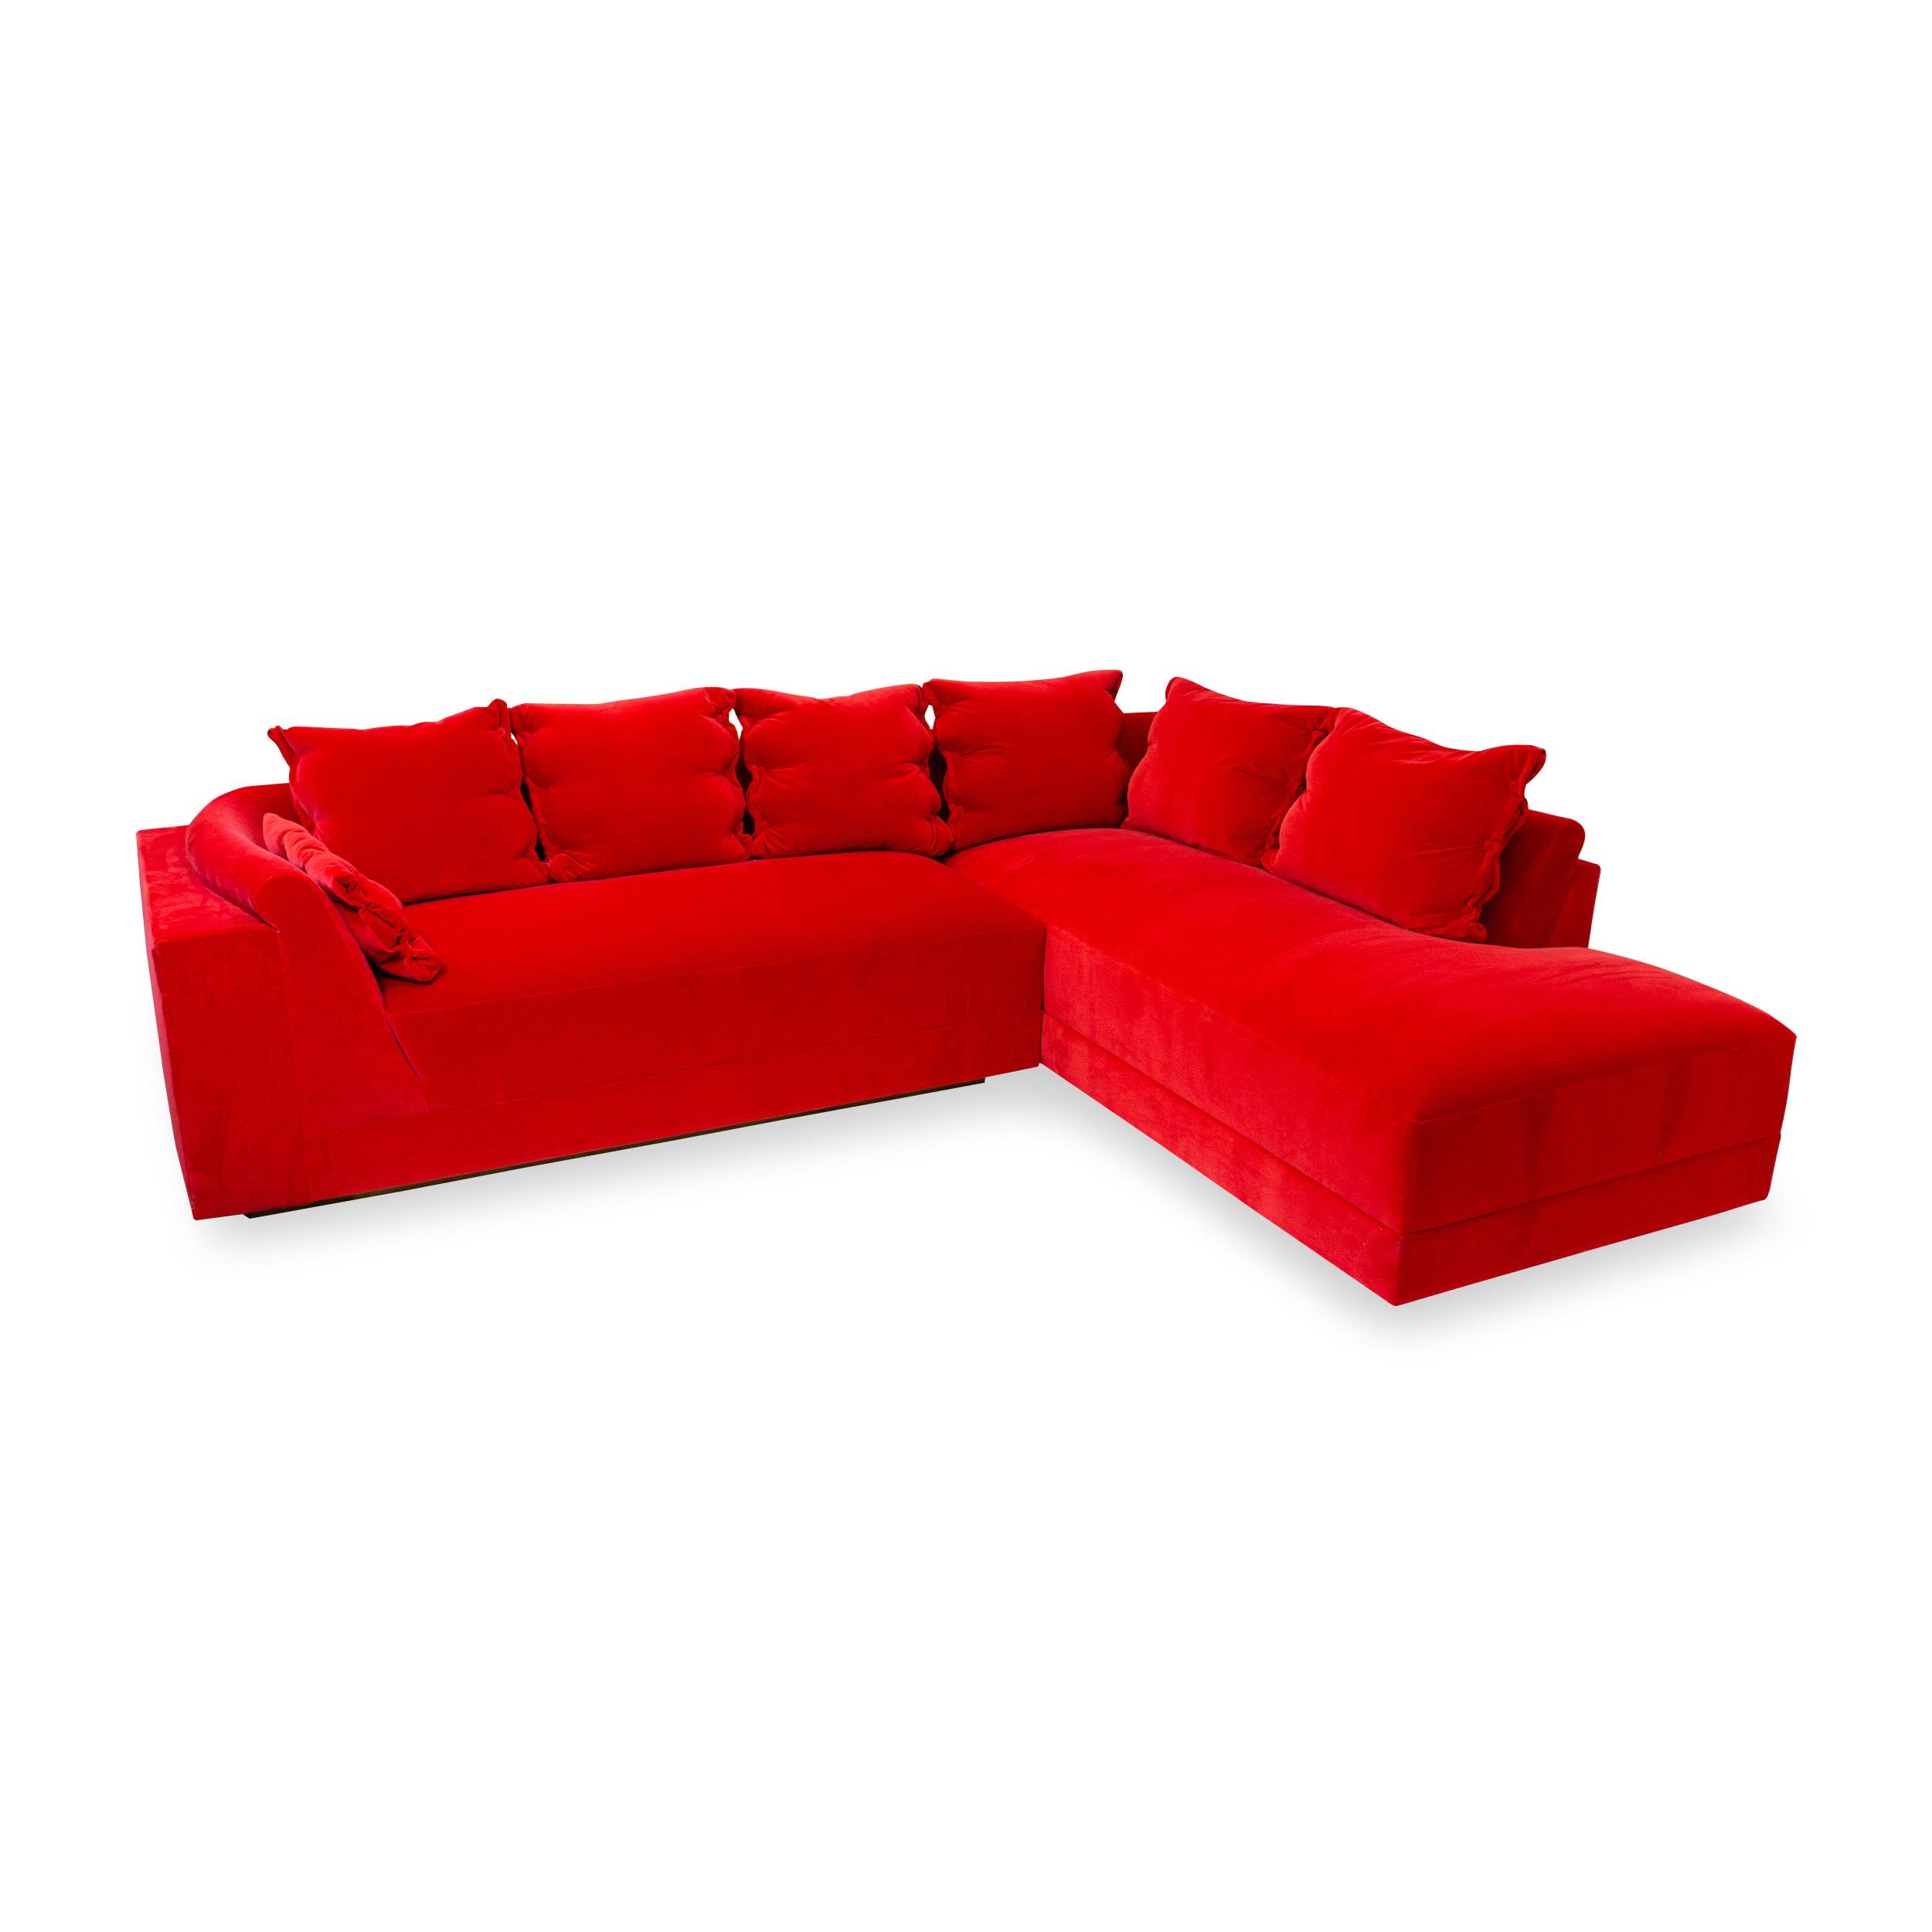 Modern L sectional with inside curve and button pillows. Recessed platform base. Tight seat and rounded inside back rail (with curve) that's soft enough for sitting but coming also with button pillows (buttons are not closures, they are sewn tight